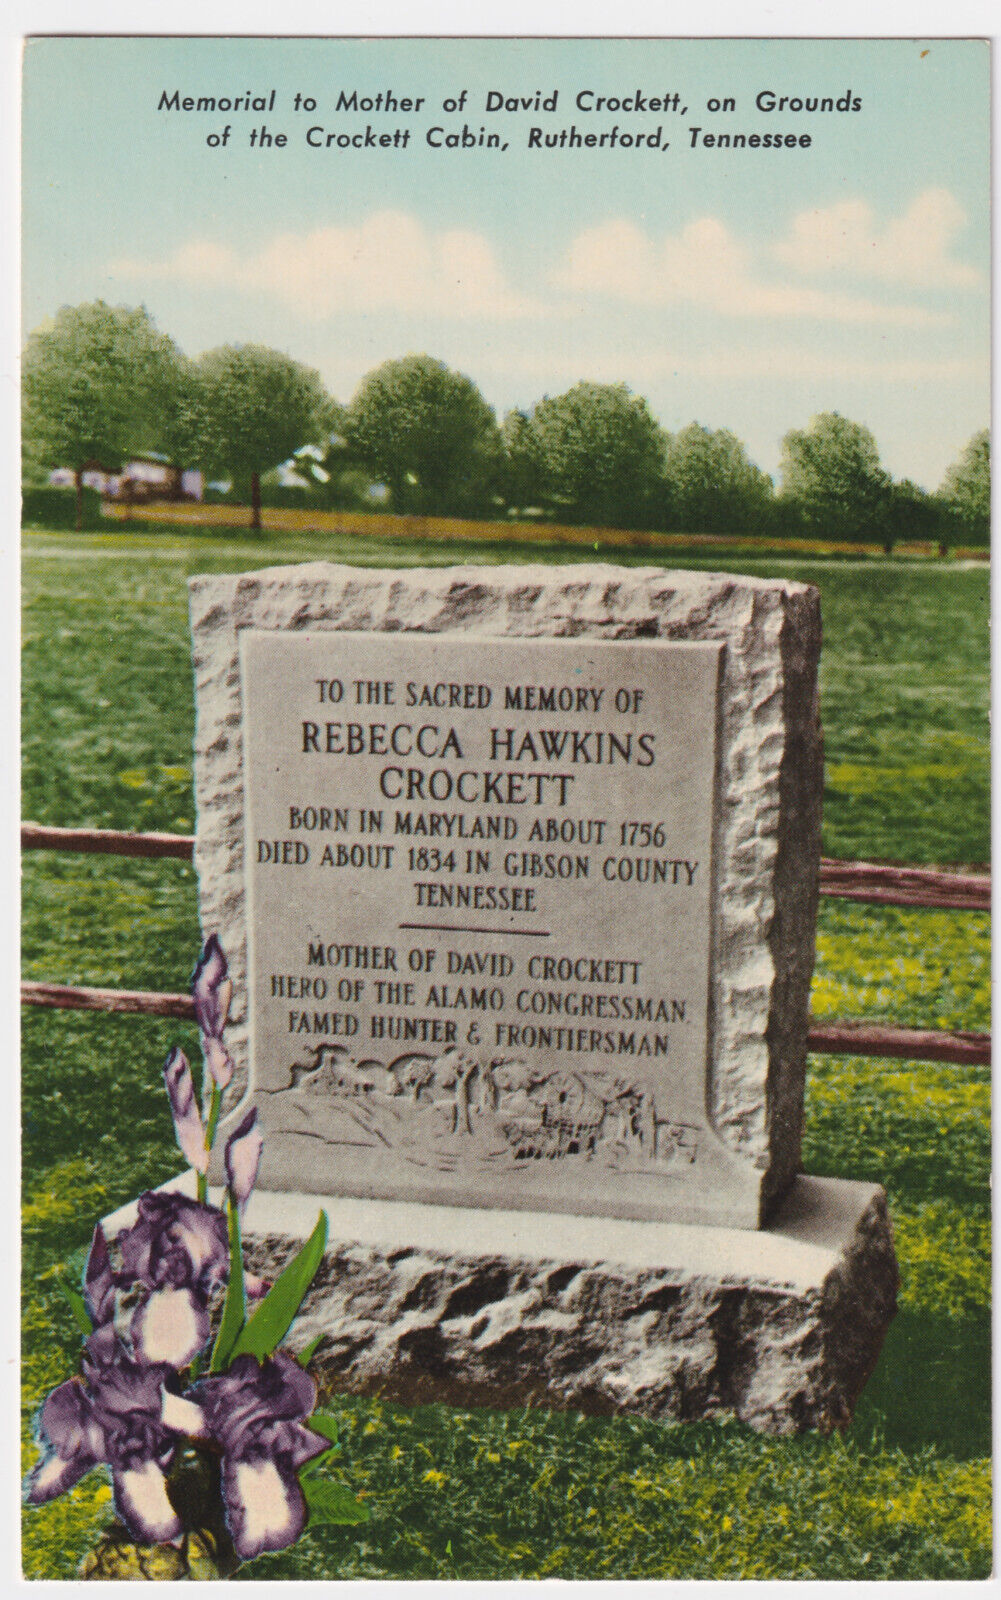 TENNESSEE RUTHERFORD REBECCA CROCKETT, MOTHER OF DAVEY CROCKETT, PUBLISHED 1967.